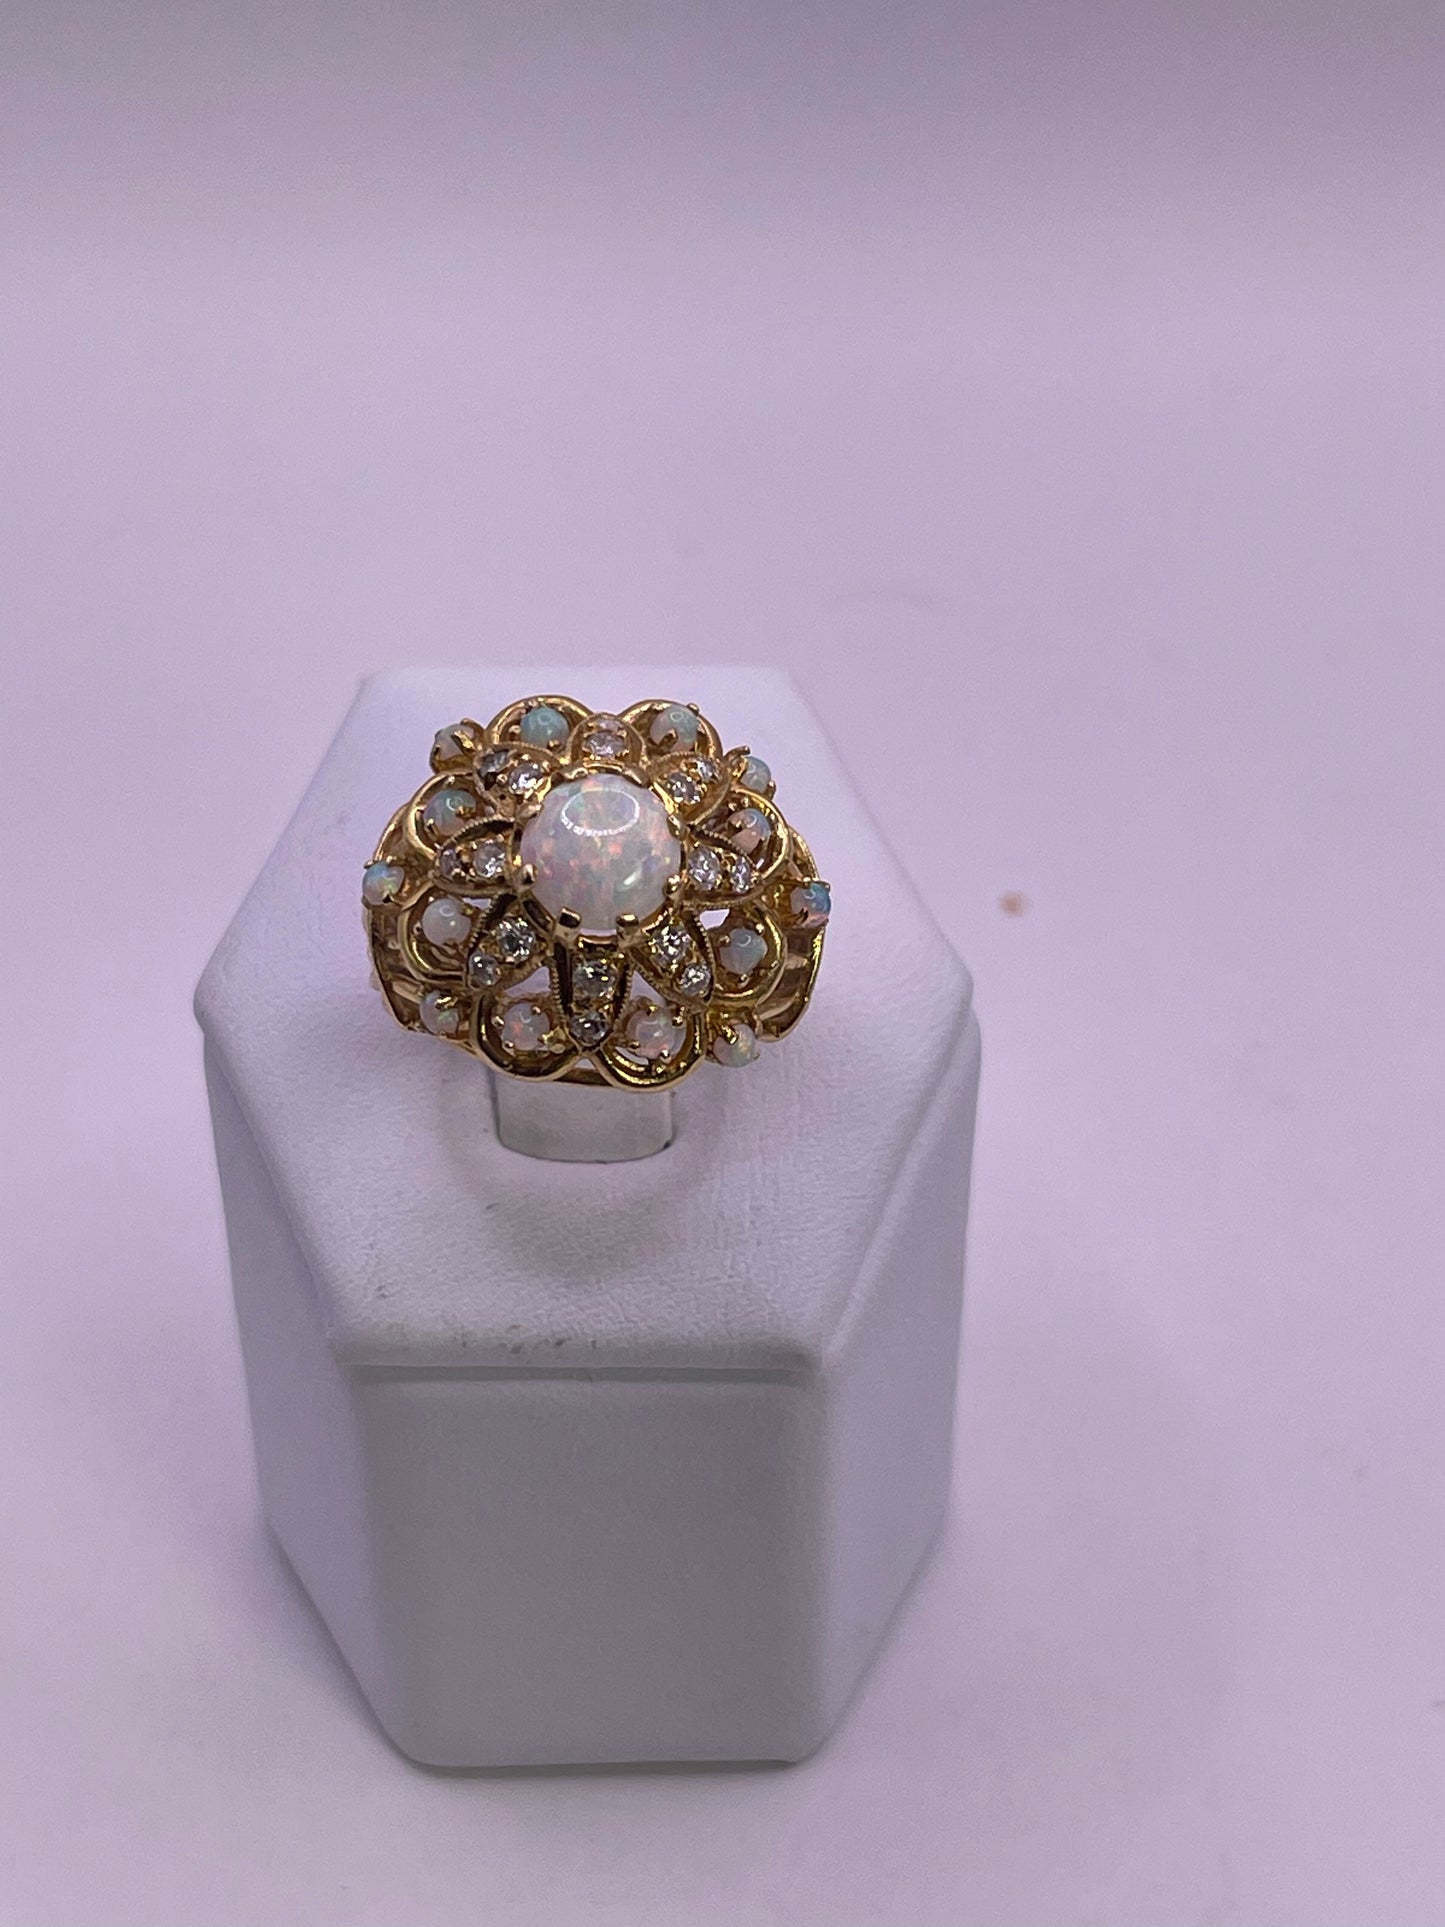 Opal, diamond and gold ring am